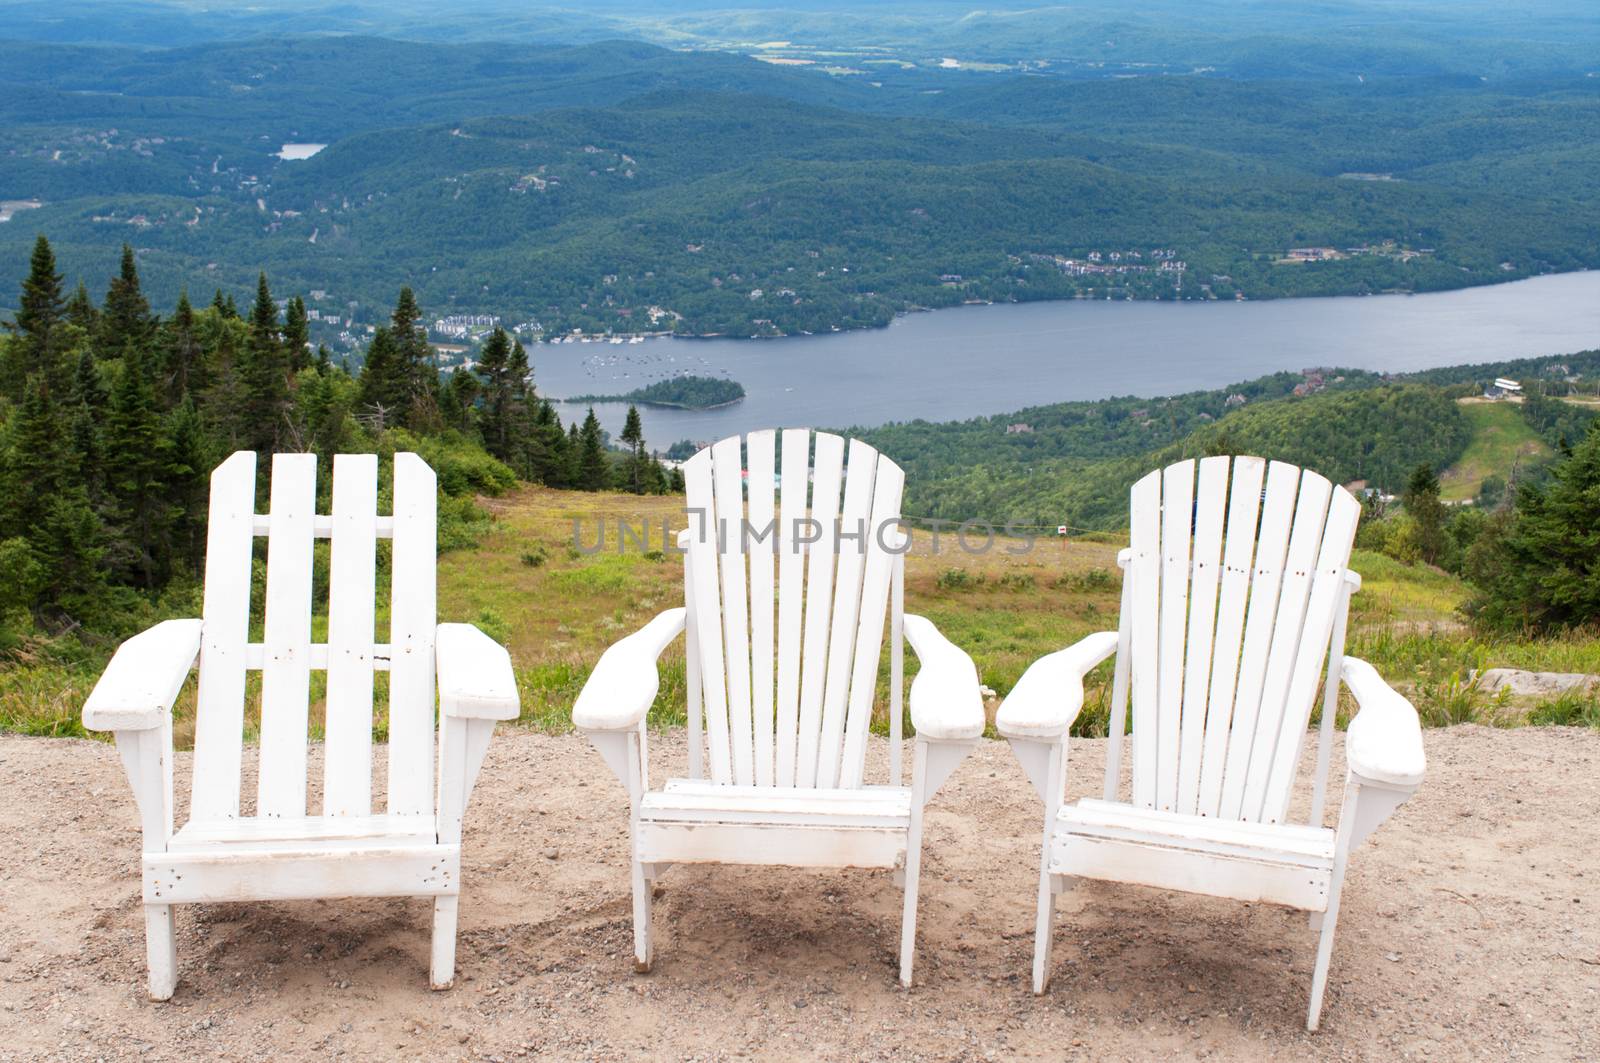 Chairs on top of mountain  at a ski resort during summer time depicting relaxing concept